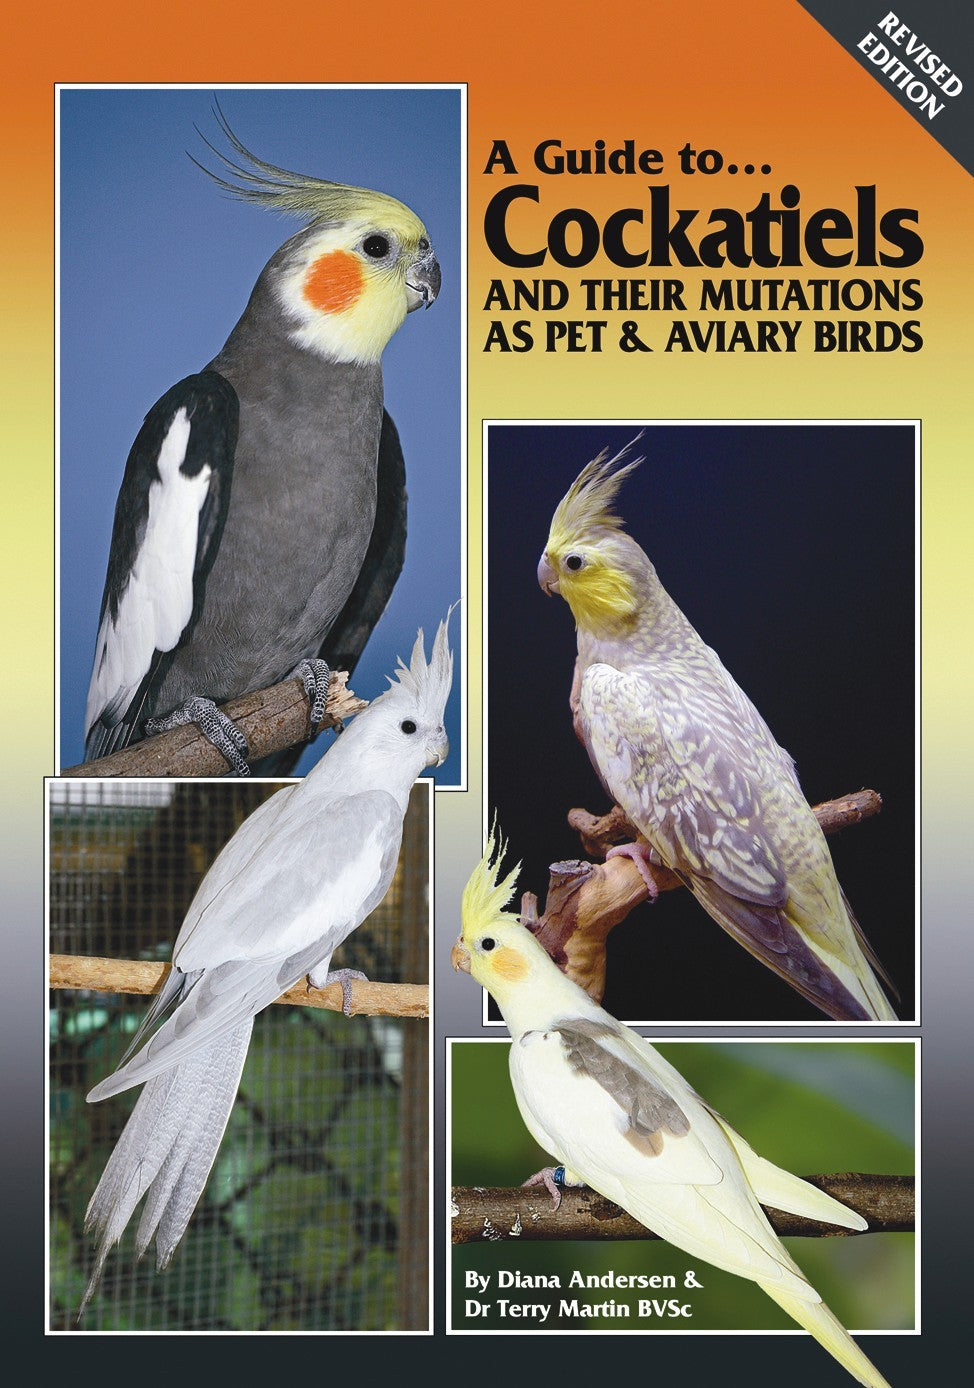 A Guide to Cockatiels & their Mutations Revised Edition (Hard Cover)